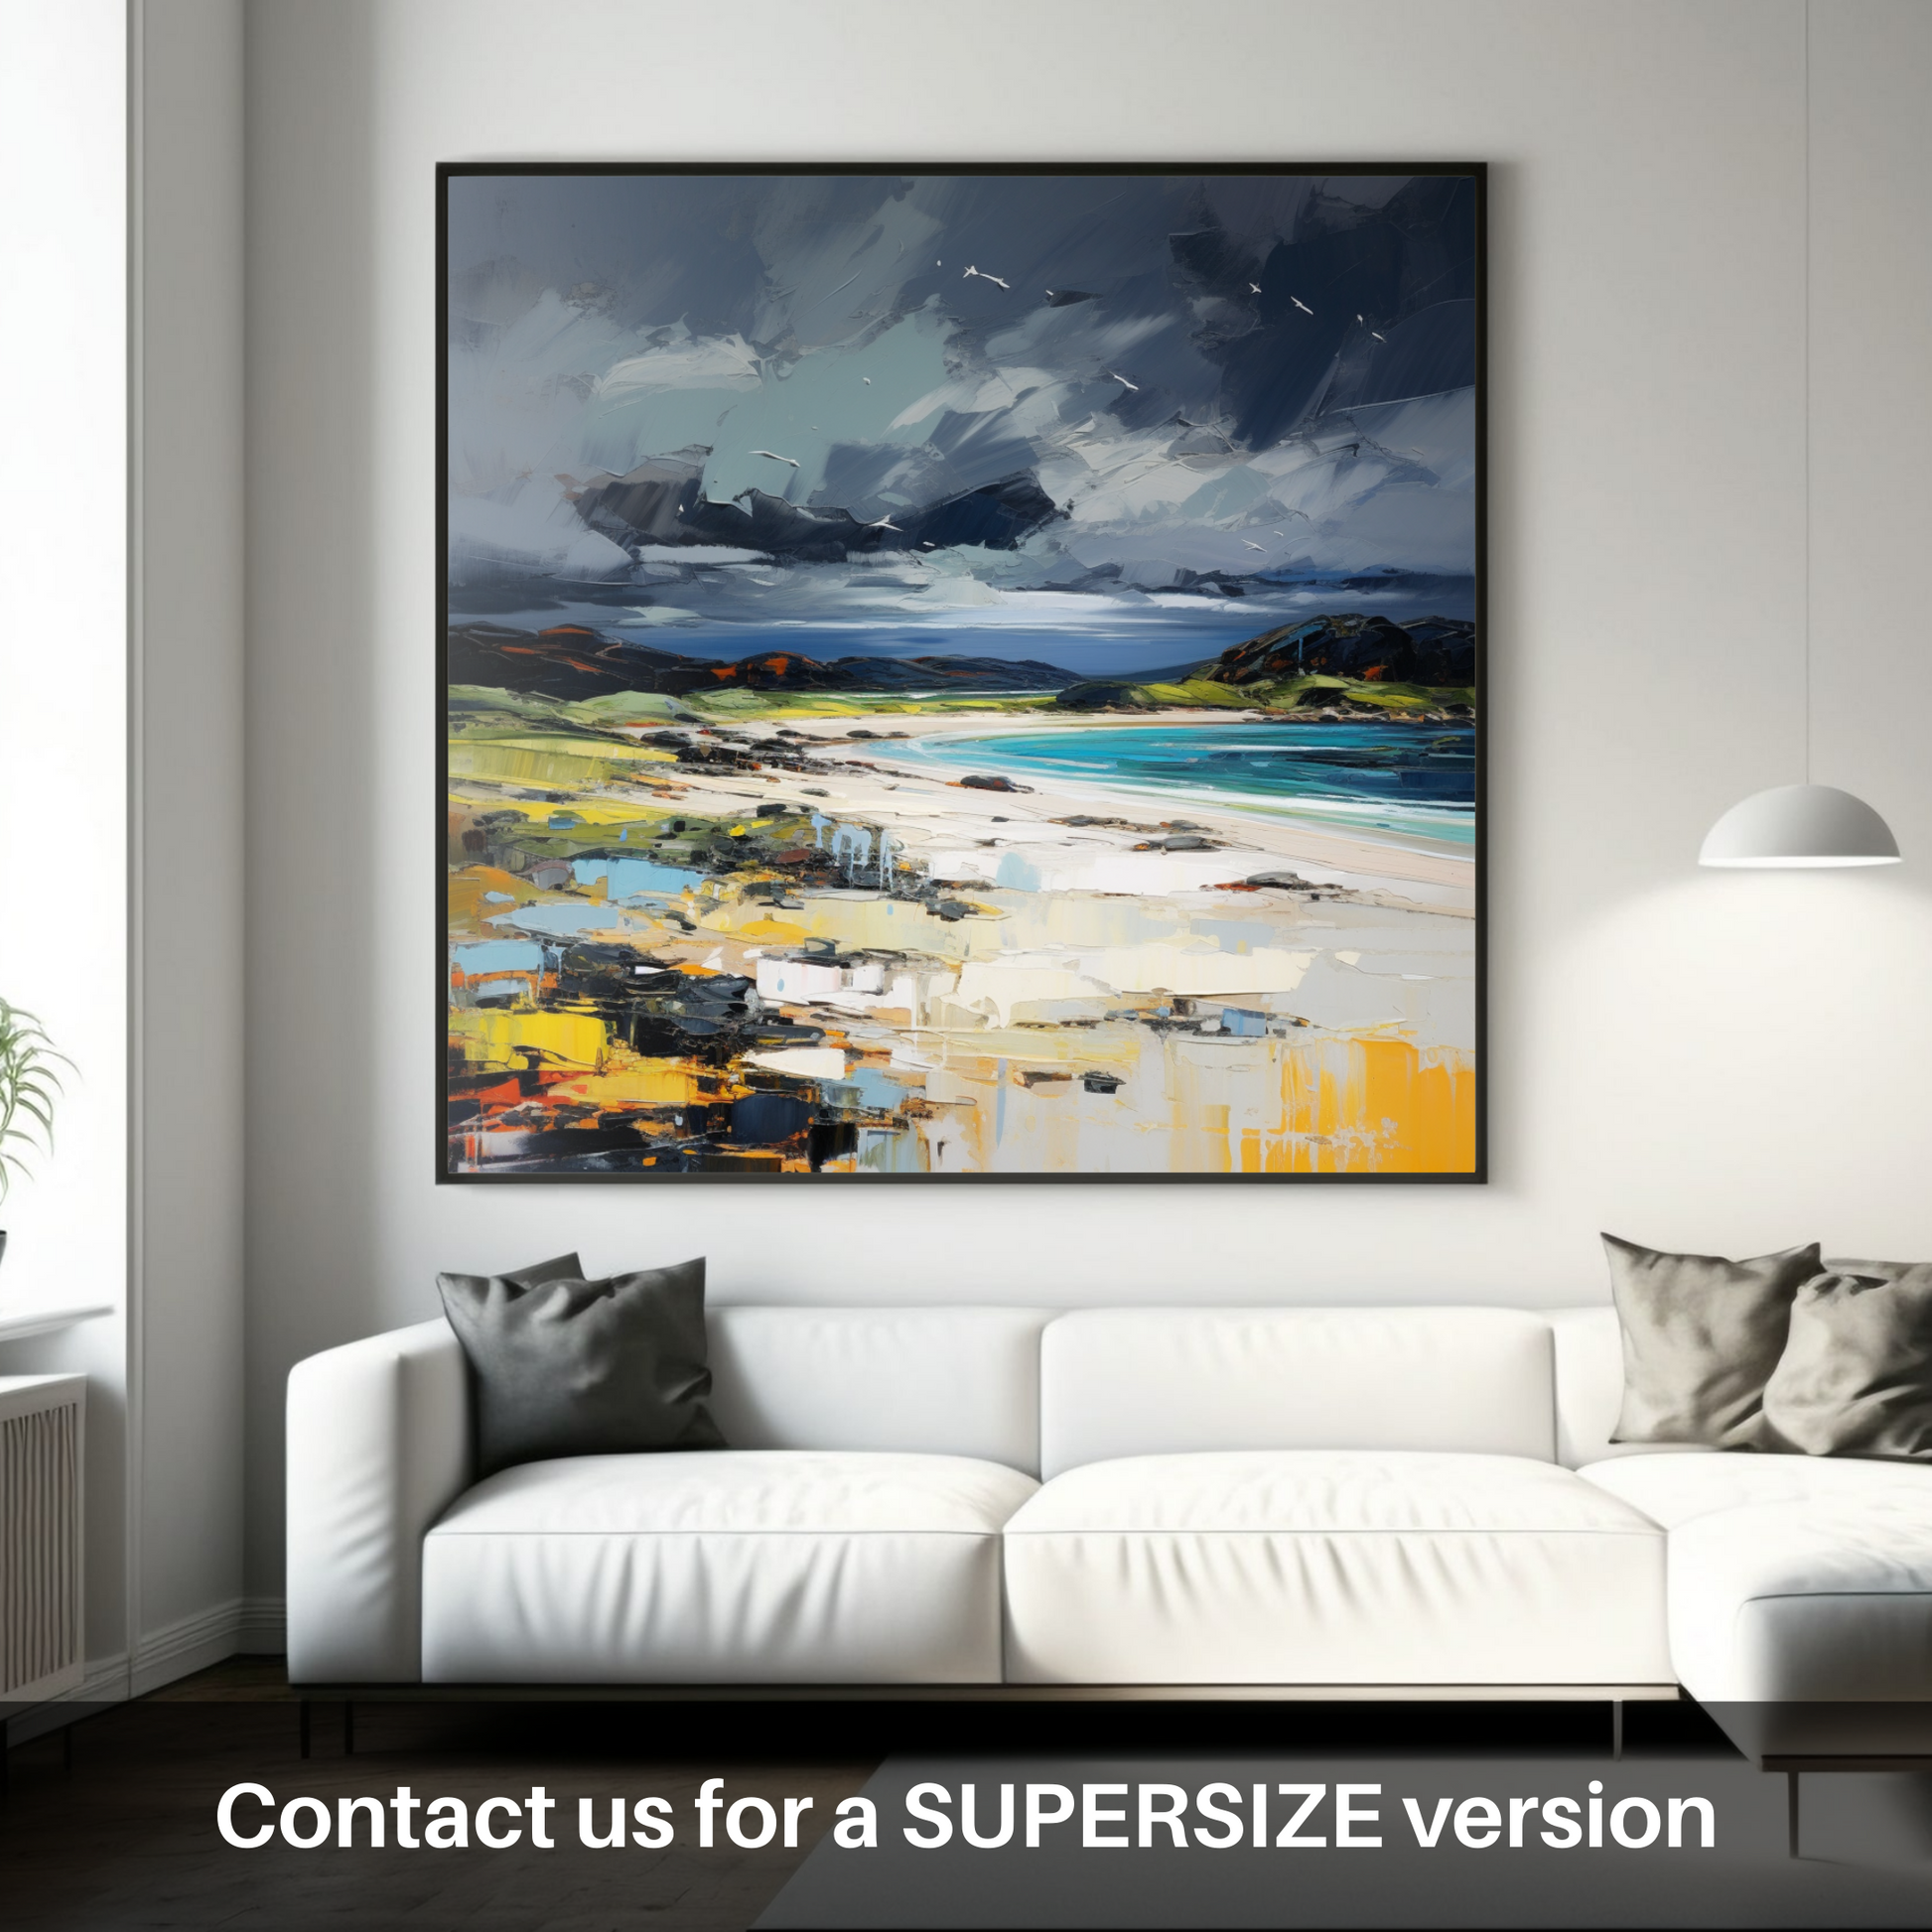 Huge supersize print of Arisaig Beach with a stormy sky